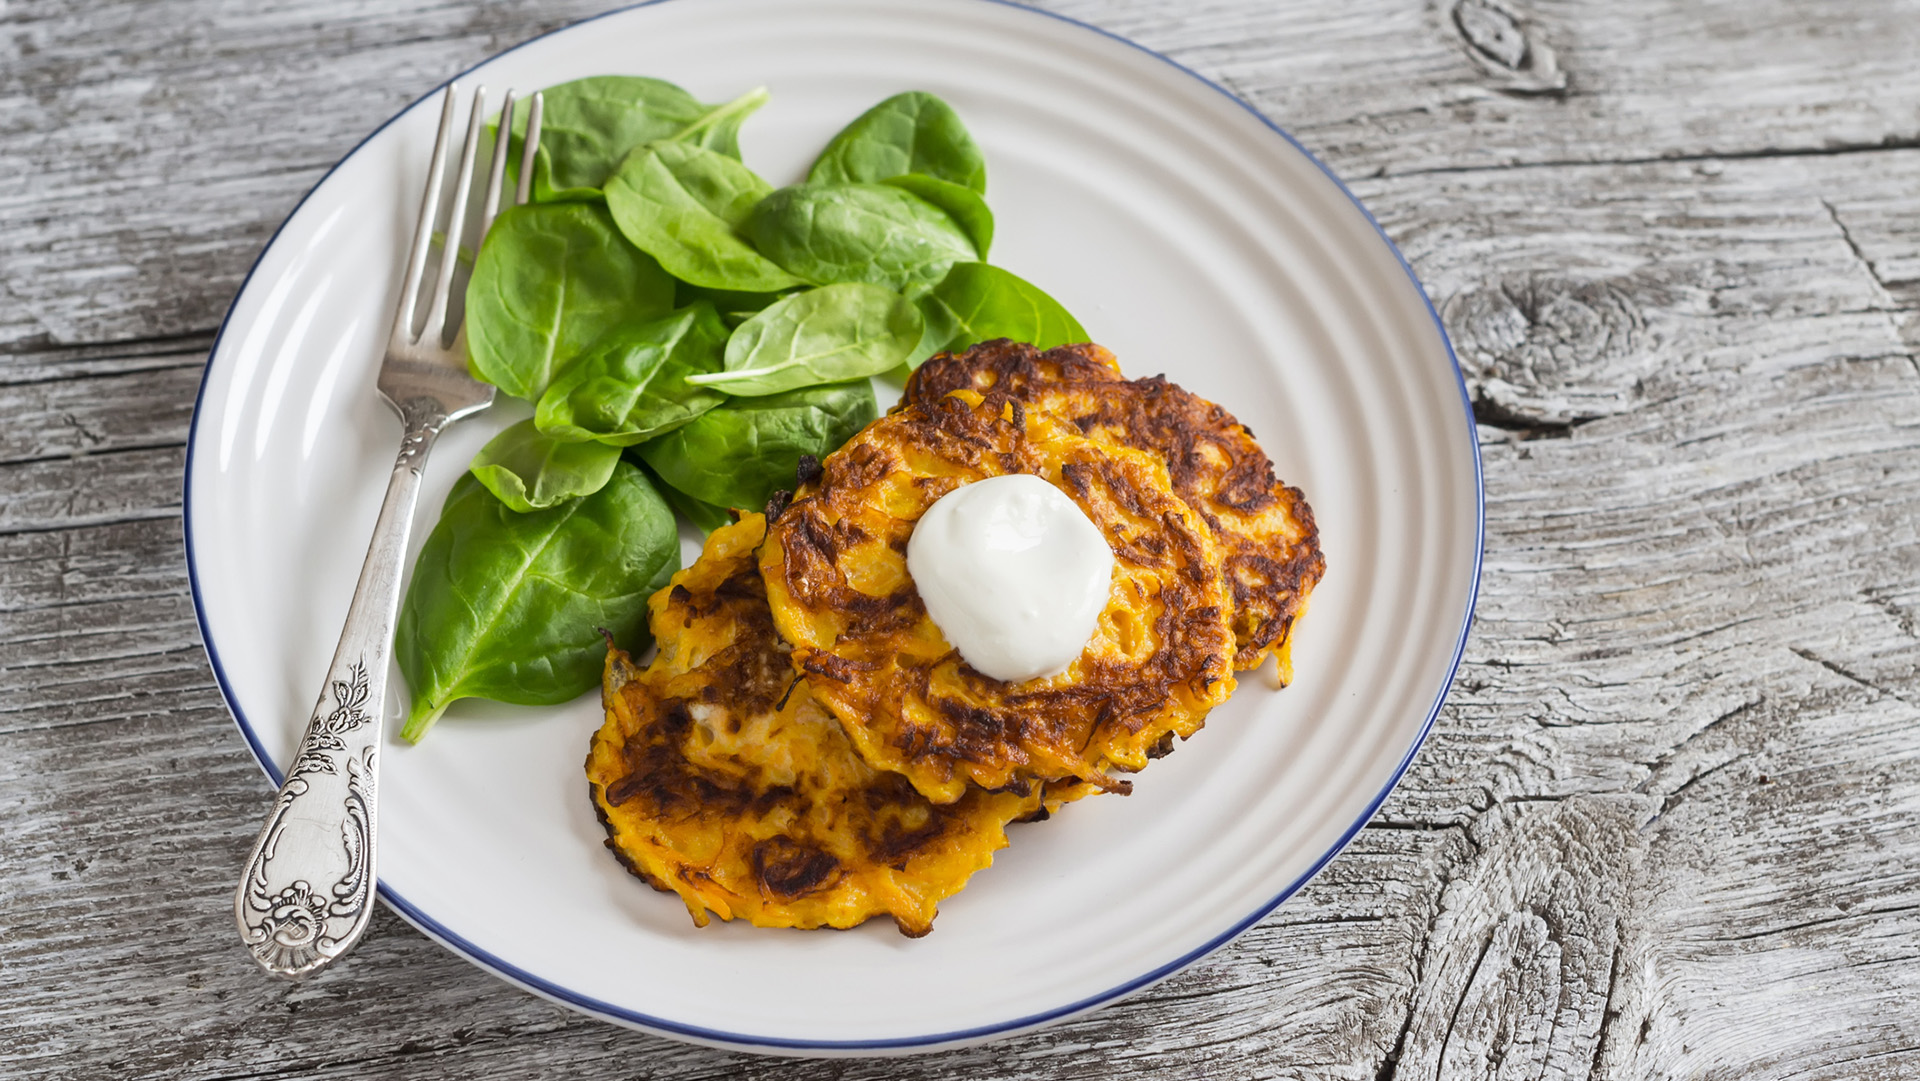 Pumpkin pancakes and fresh spinach on rustic light wooden table